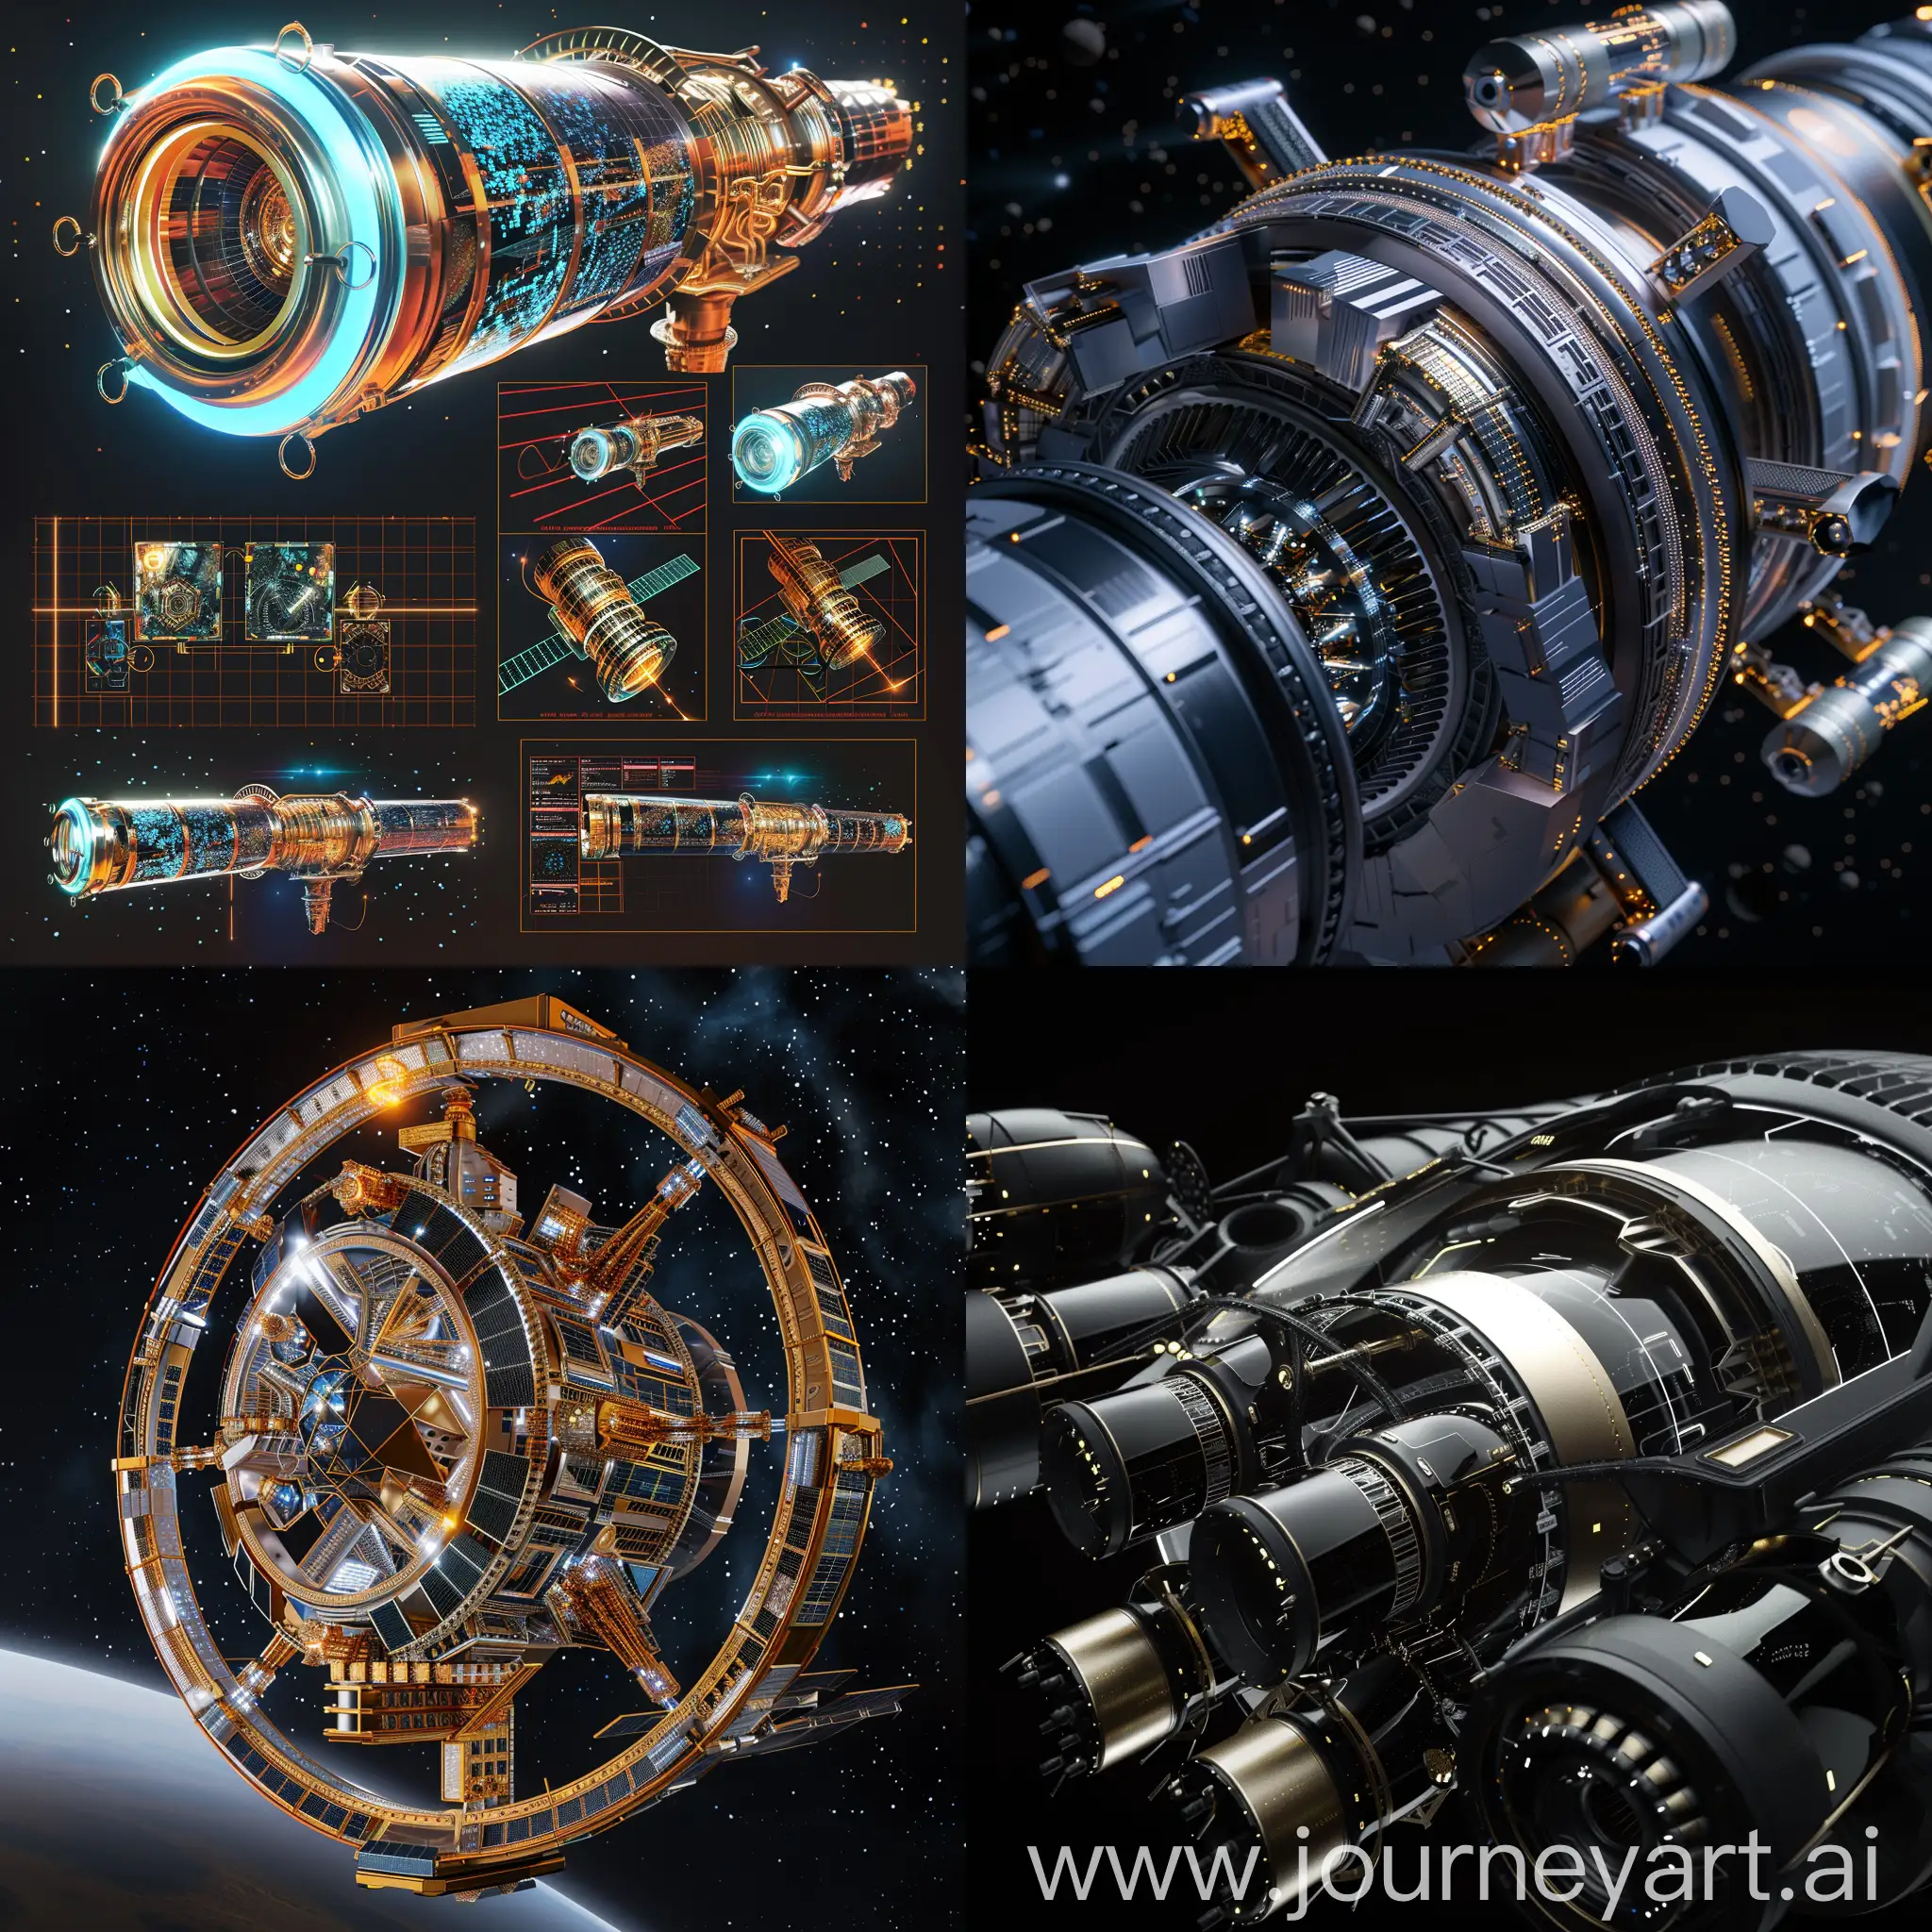 Advanced-SciFi-Space-Telescope-with-Modular-Construction-and-Holographic-Displays